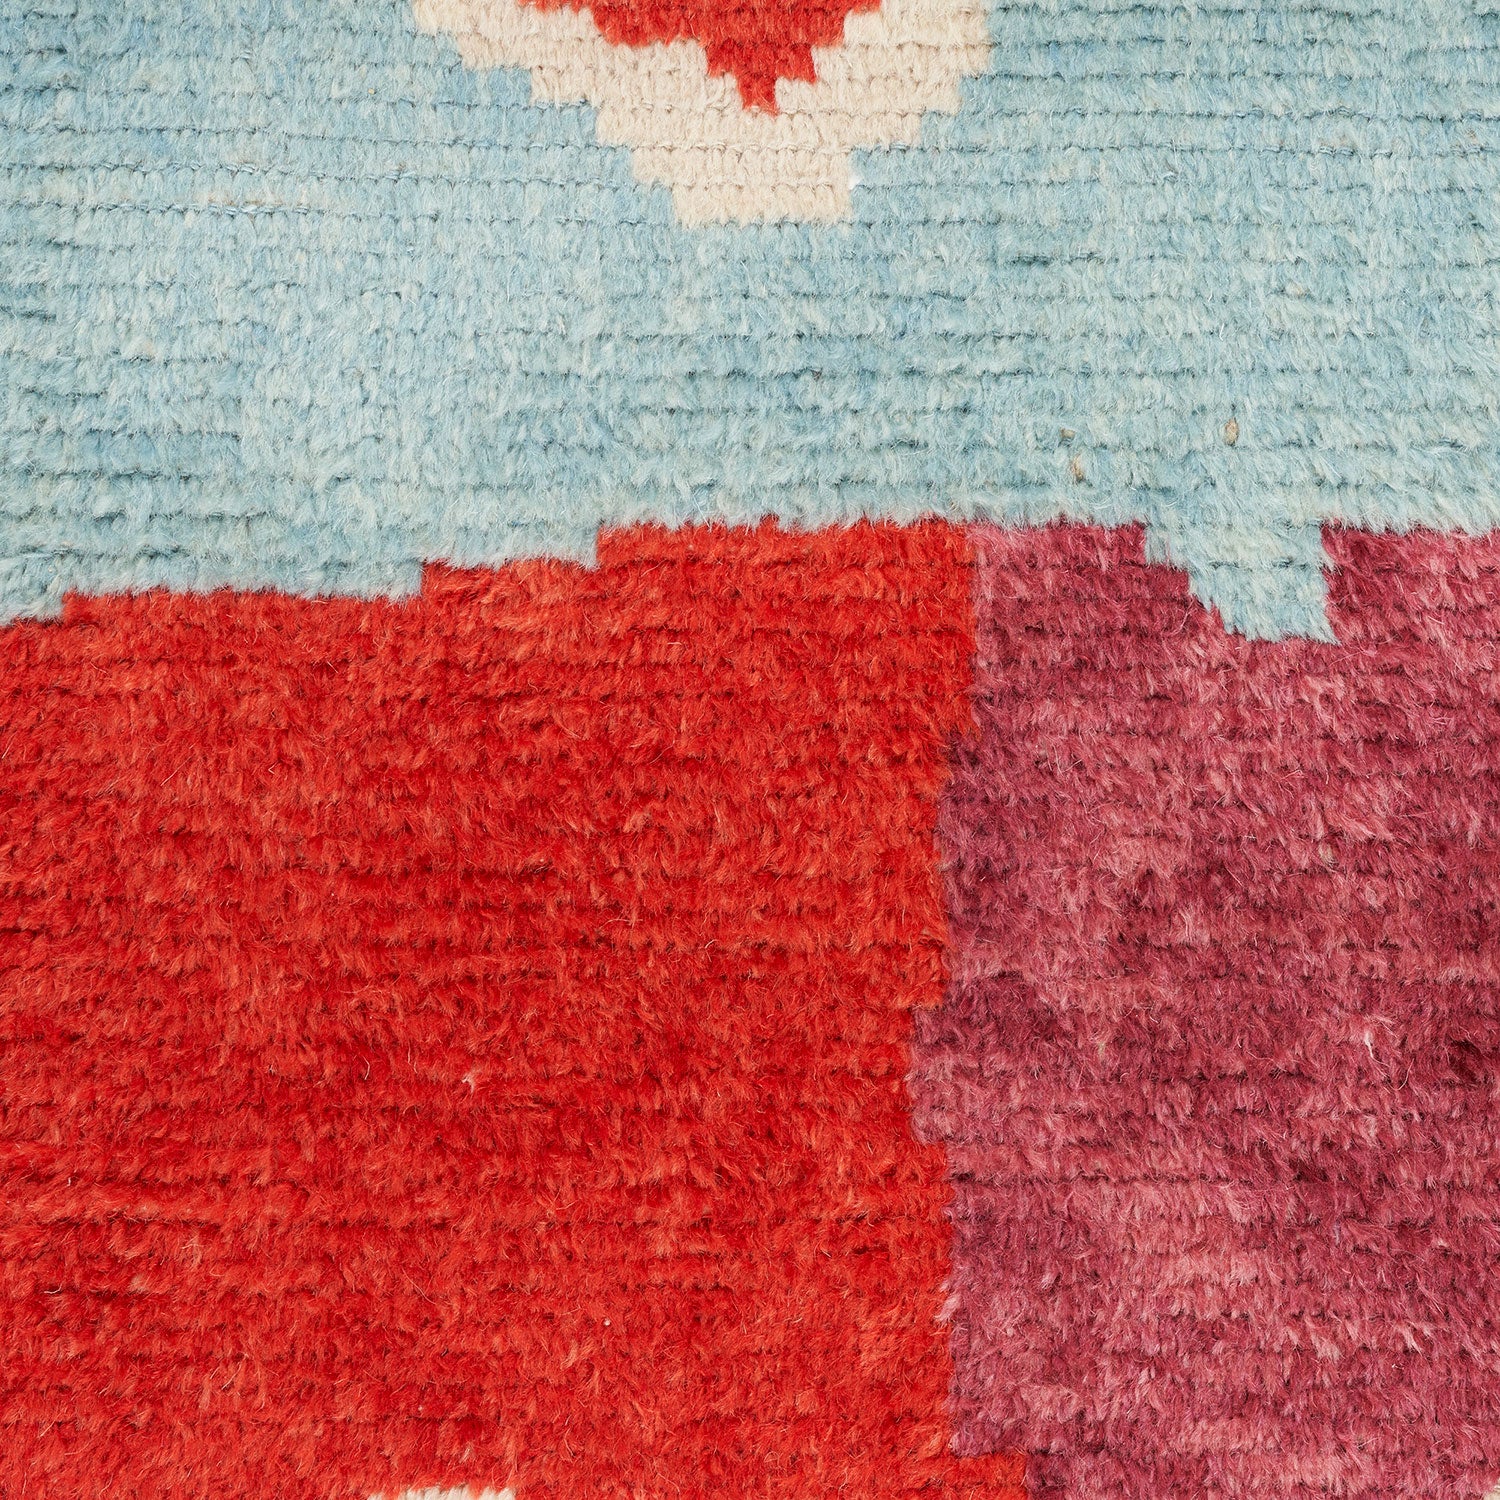 Close-up of colorful pile fabric with red, pink, and blue.